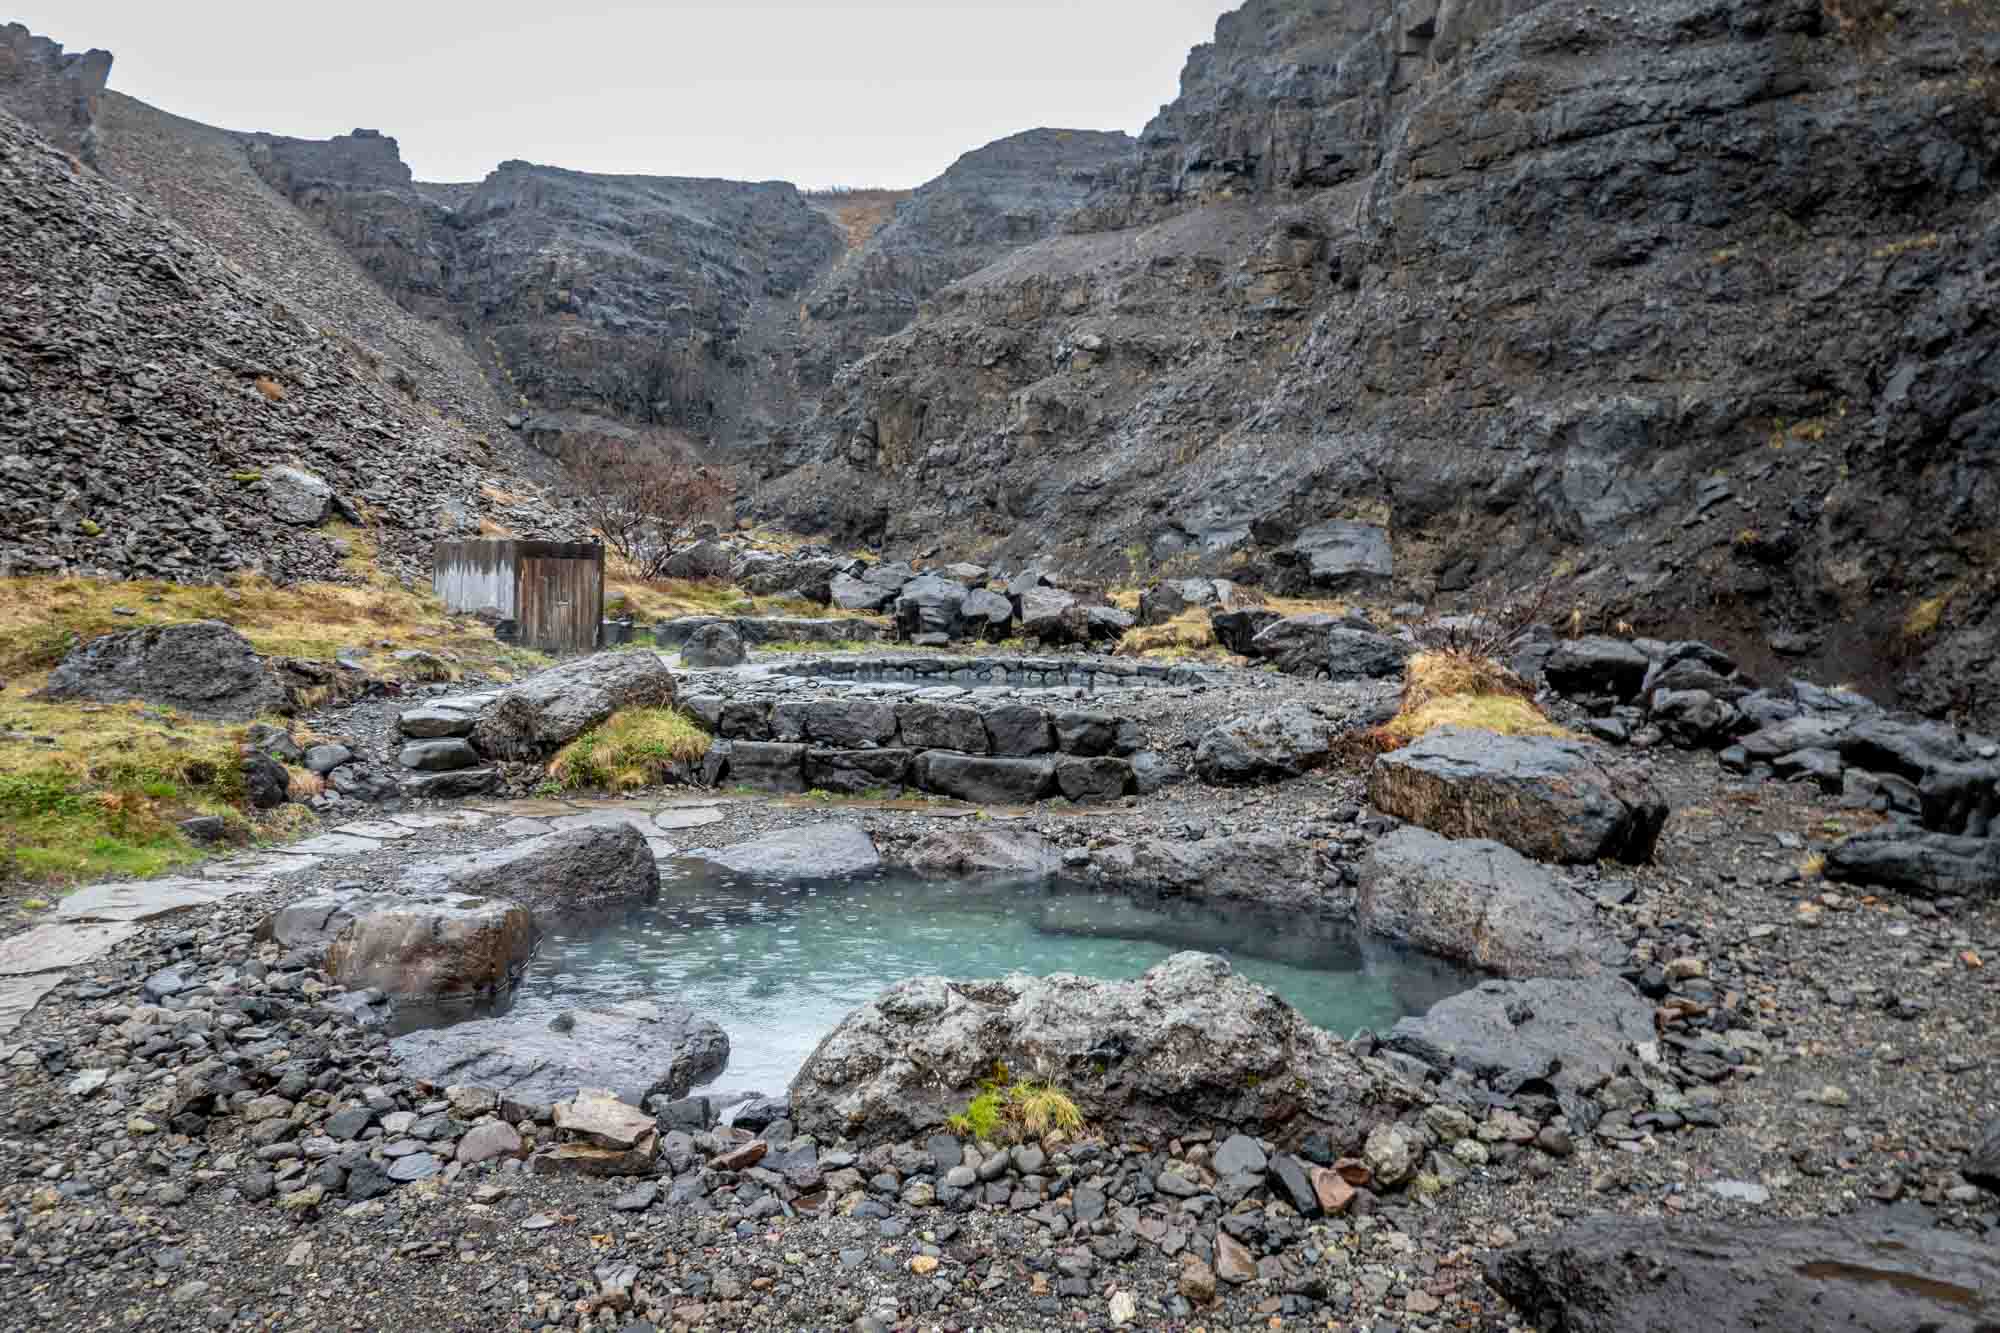 Two hot springs pools in a rocky canyon